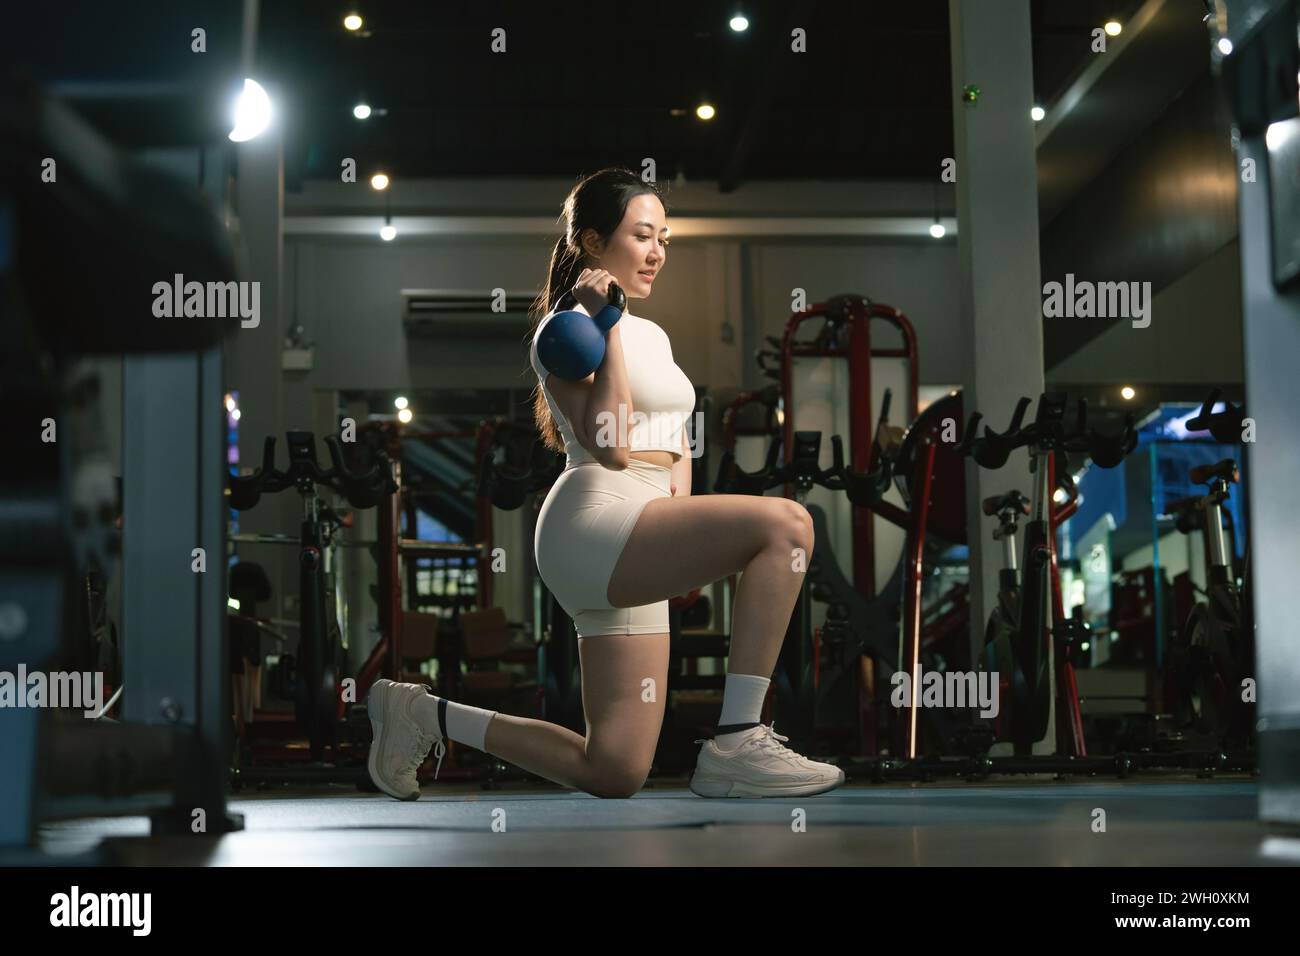 Young woman exercise workout at gym fitness training sport with kettlebell weight lifting. Stock Photo